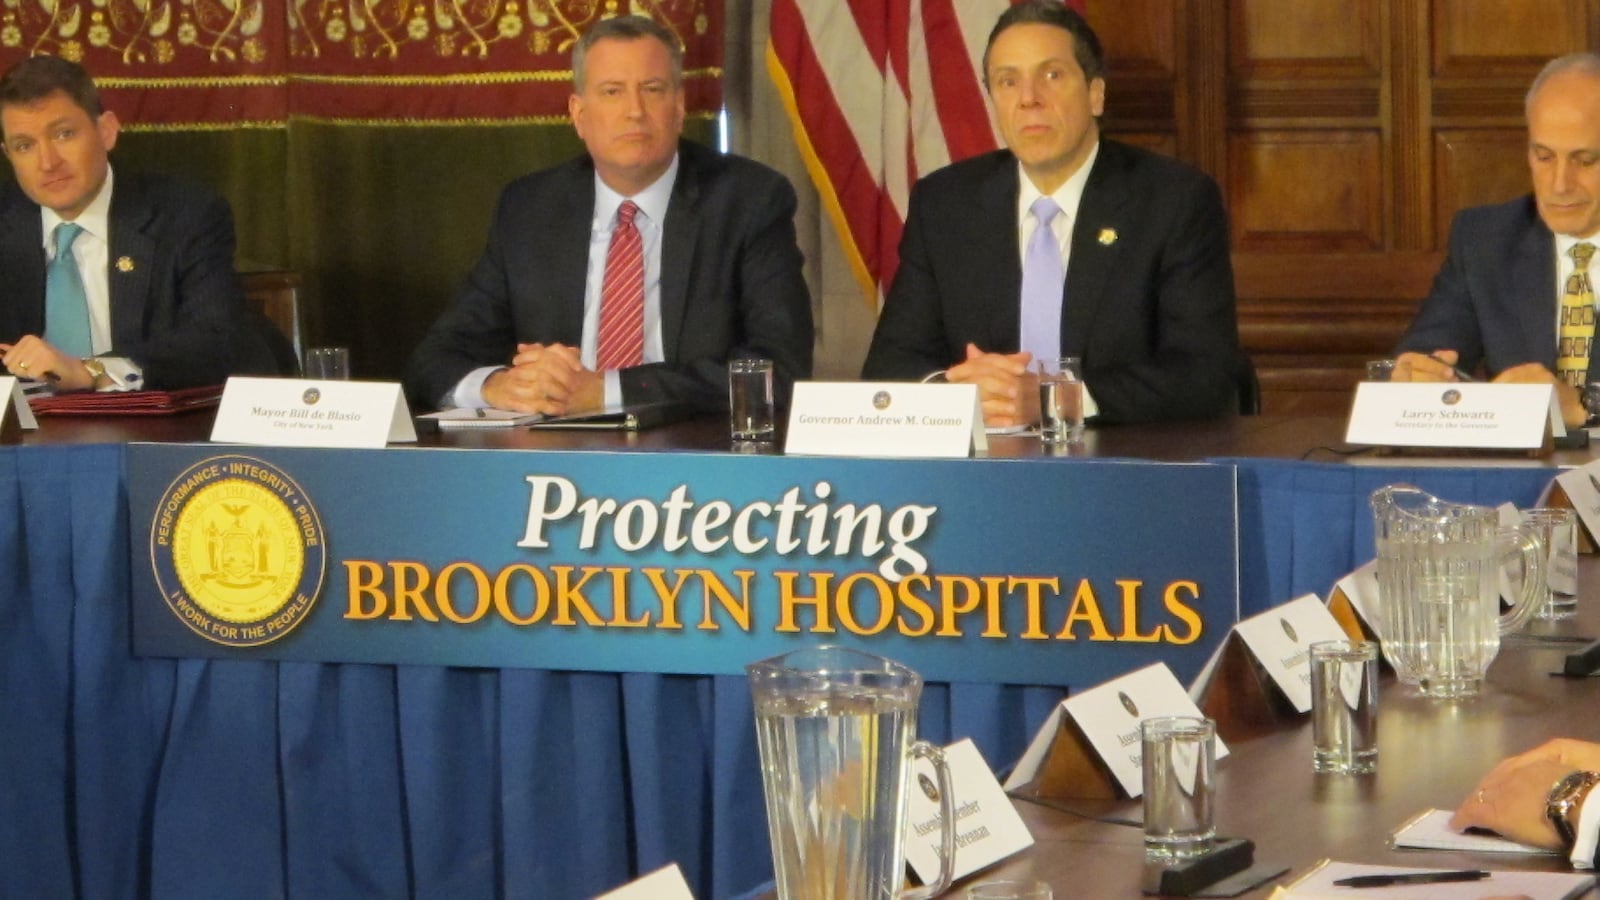 Bill de Blasio and Andrew Cuomo at a press conference in Albany discussing Brooklyn hospitals. The duo played down tension around their competing visions for funding universal pre-kindergarten.